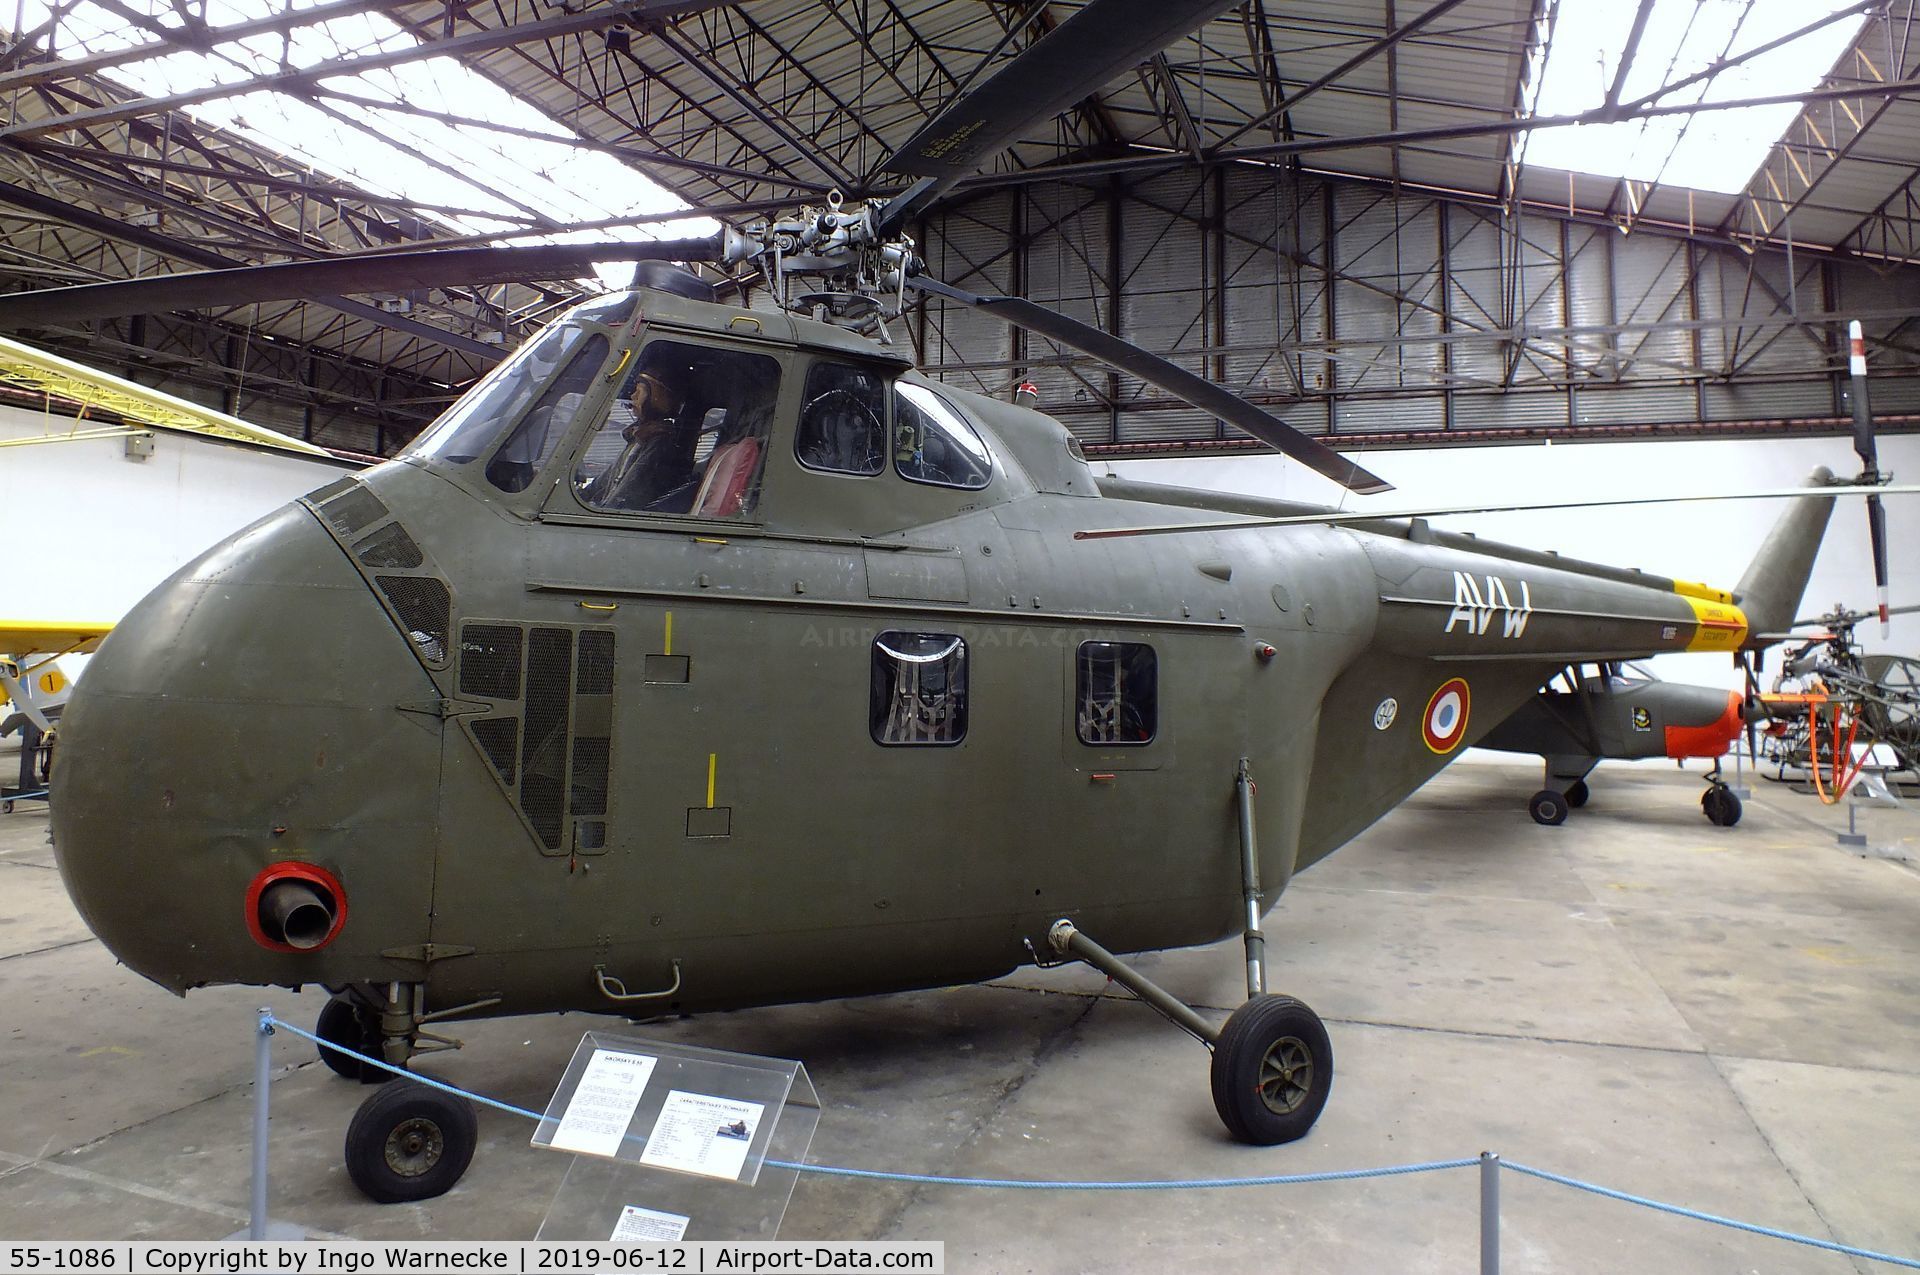 55-1086, Sikorsky H-19D Chickasaw C/N 55-1086, Sikorsky H-19D Chickasaw at the Musee de l'ALAT et de l'Helicoptere, Dax